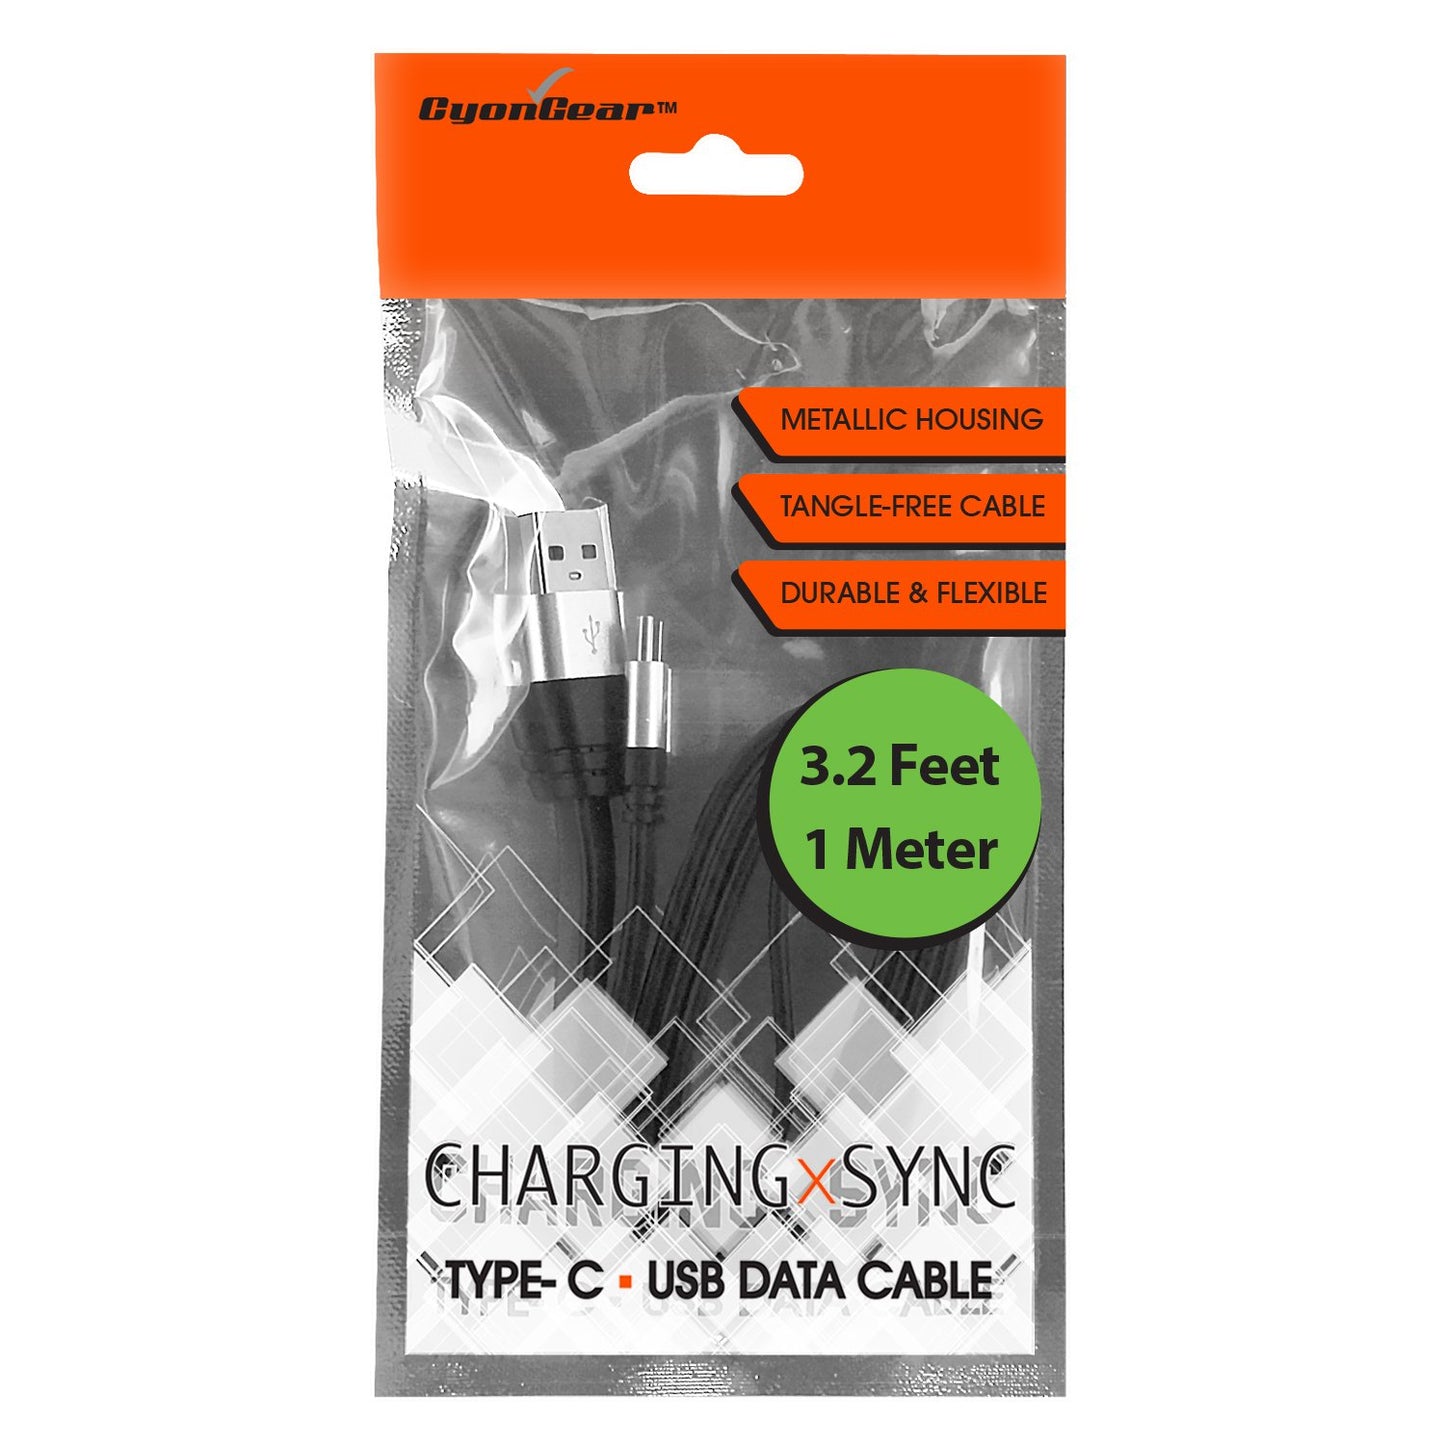 DCA33BK - USB-A to USB-C Cable, CyonGear Tangle-Free Standard 3.2ft (1m) USB-A to USB-C Charging Sync Cable for Google Pixel XL, LG G5, Nexus 5x/6P, LG V20, Motorola Moto Z/Z Force, HTC 10 and more